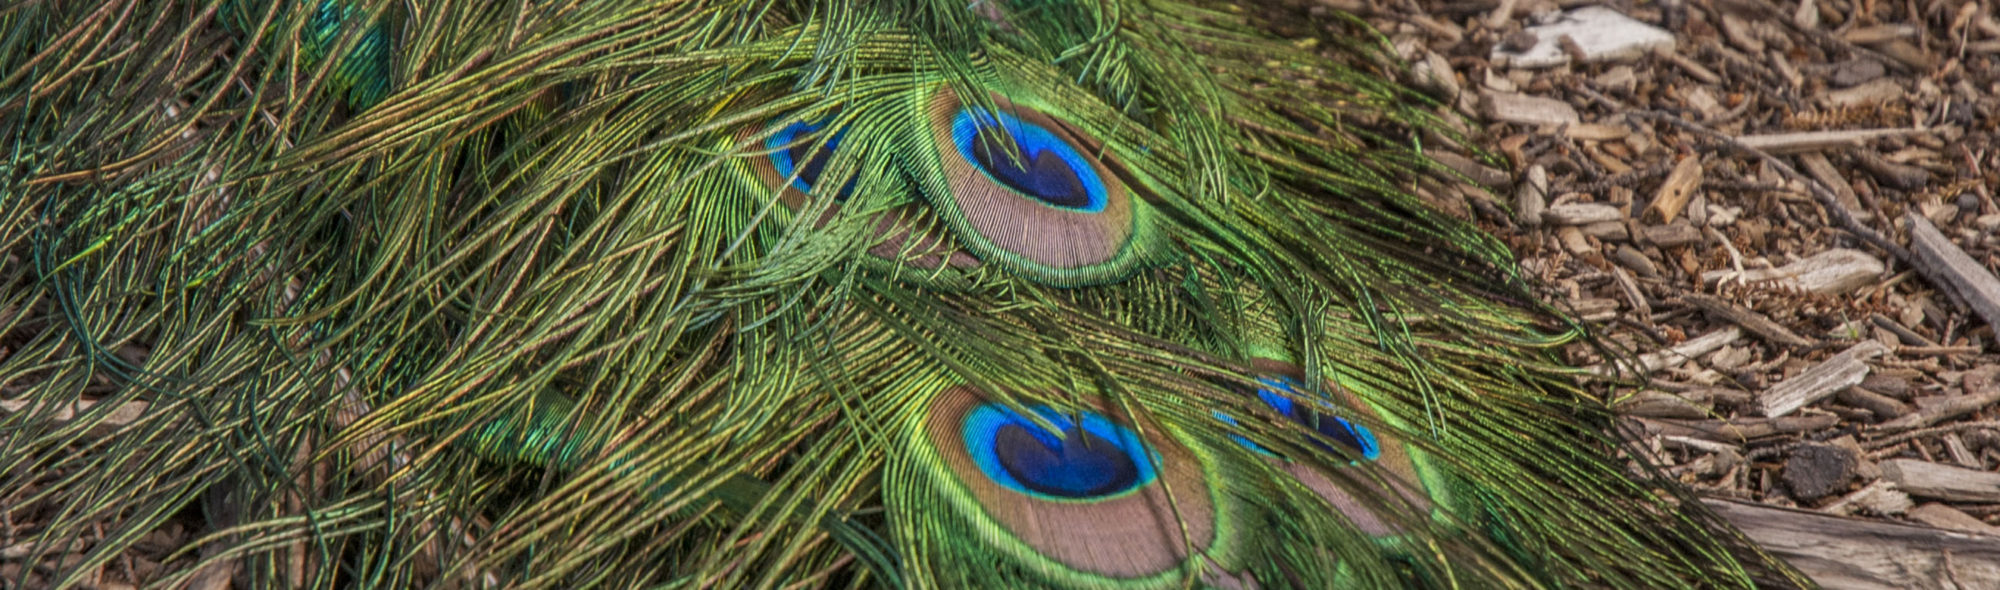 The Peacock Dreaming Blog